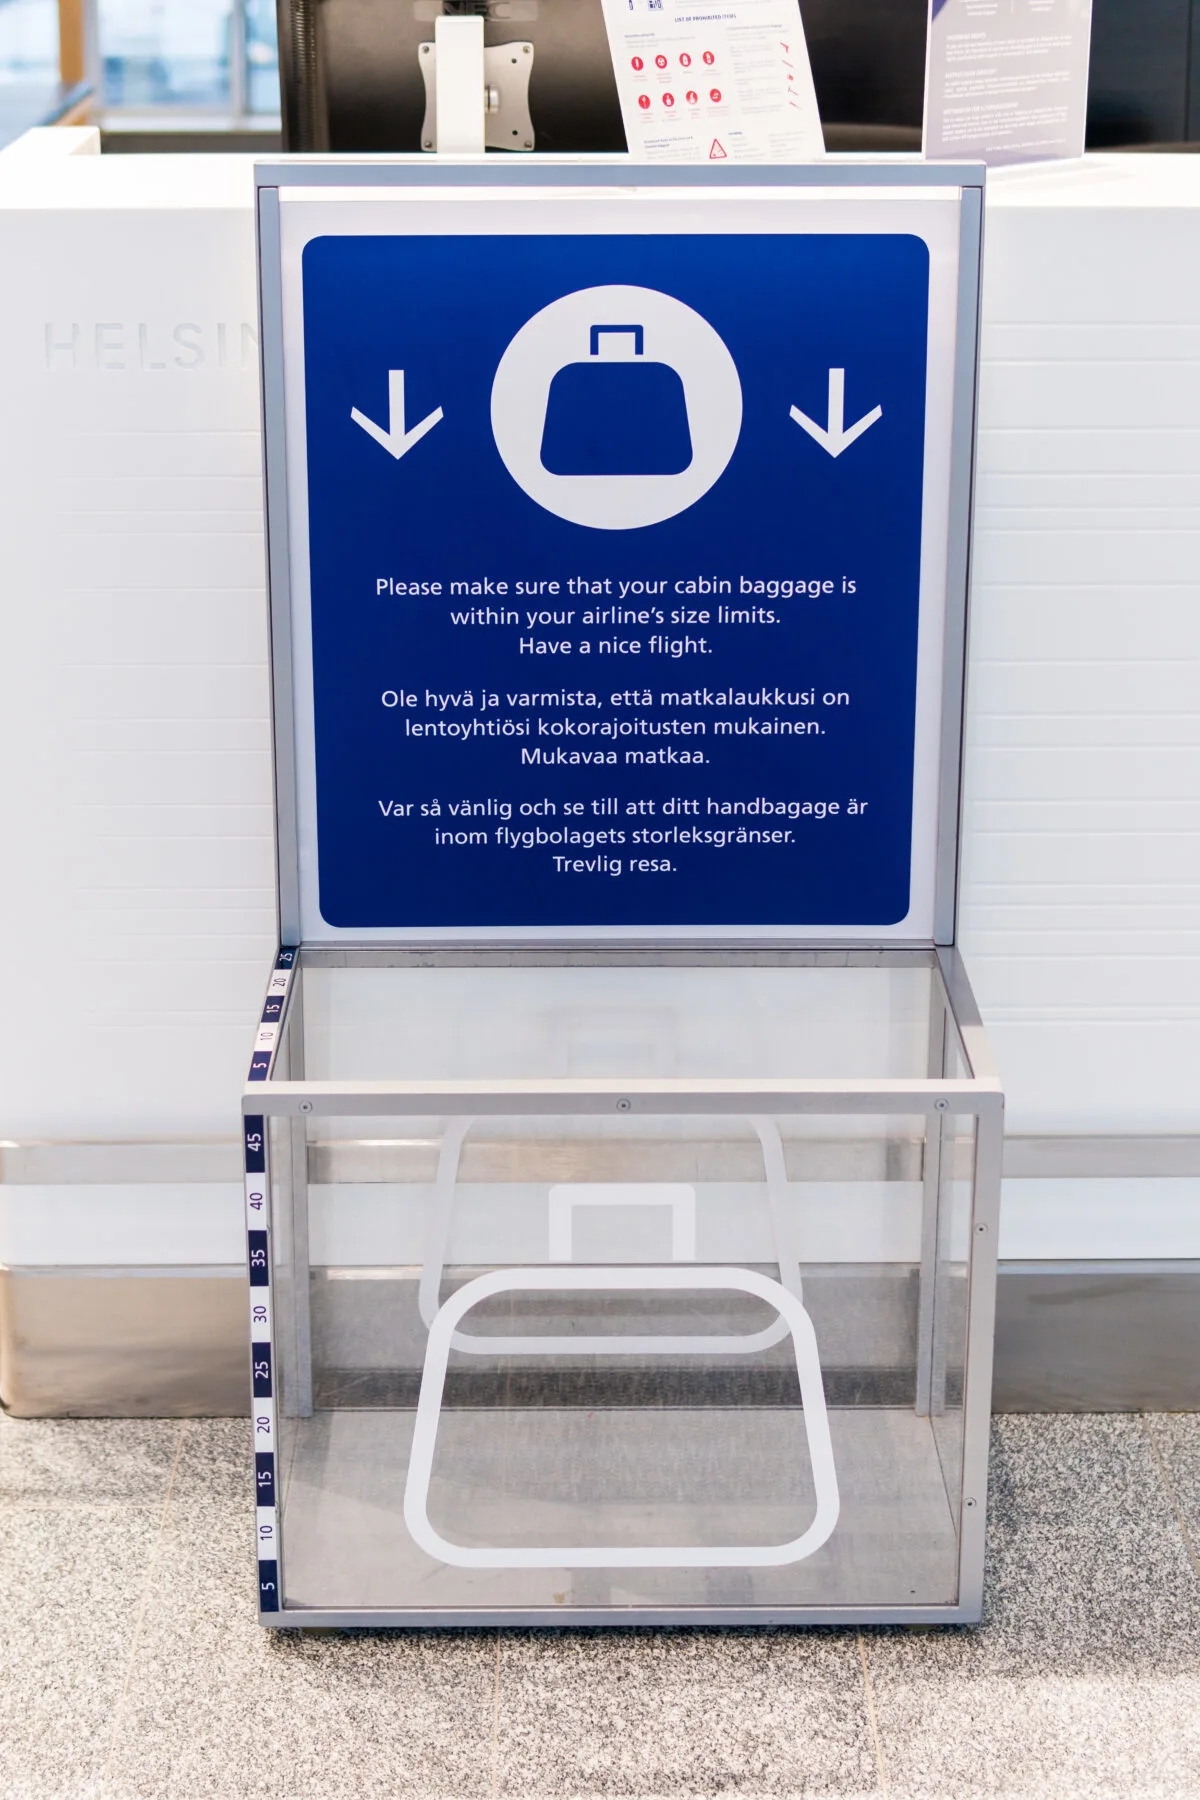 carry on luggage sizer in airport